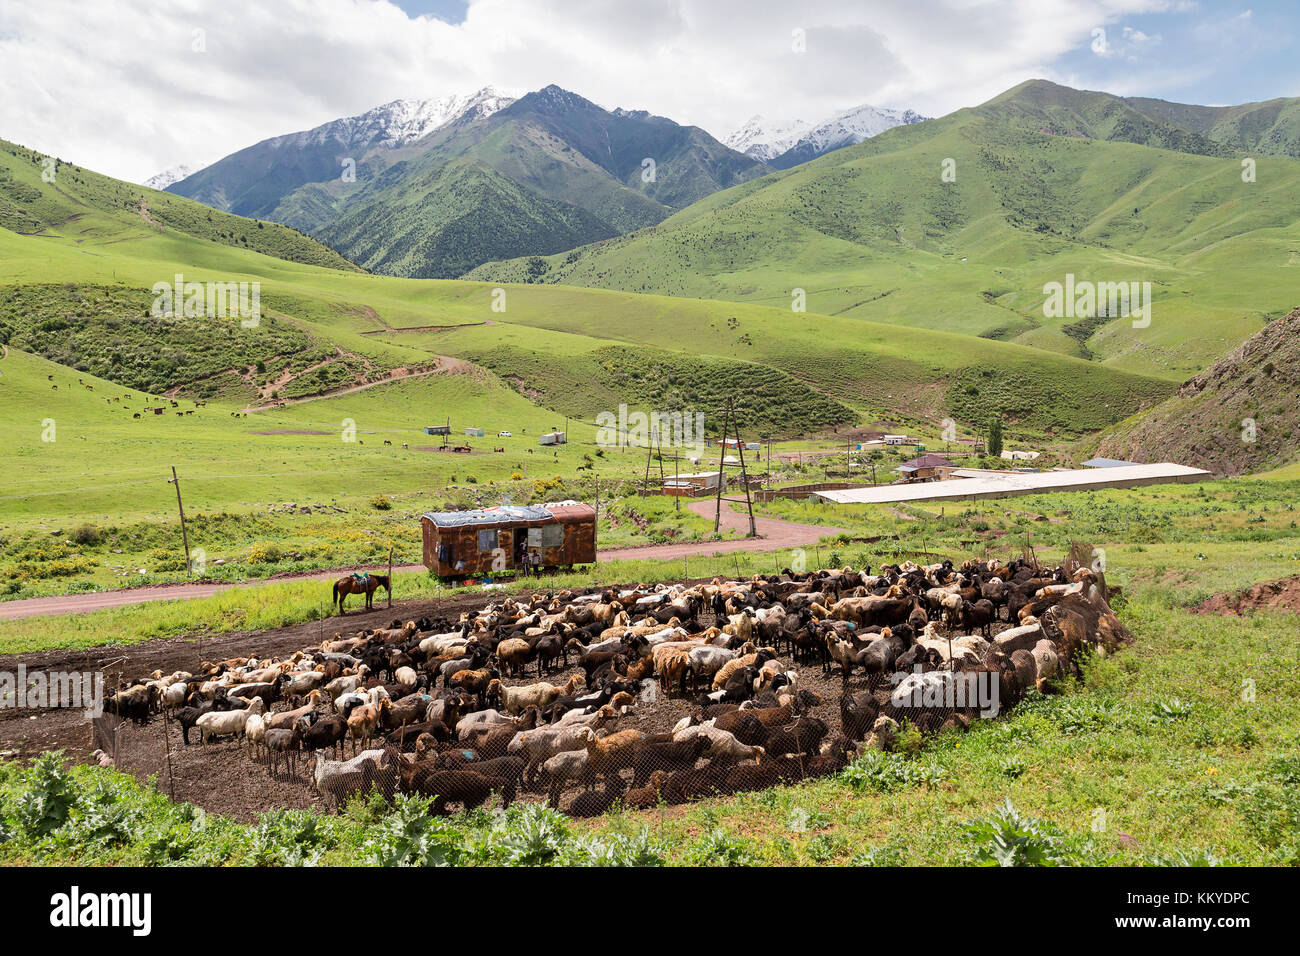 Herd of sheep and nomads in the high plateaus near Bishkek, Kyrgyzstan. Stock Photo